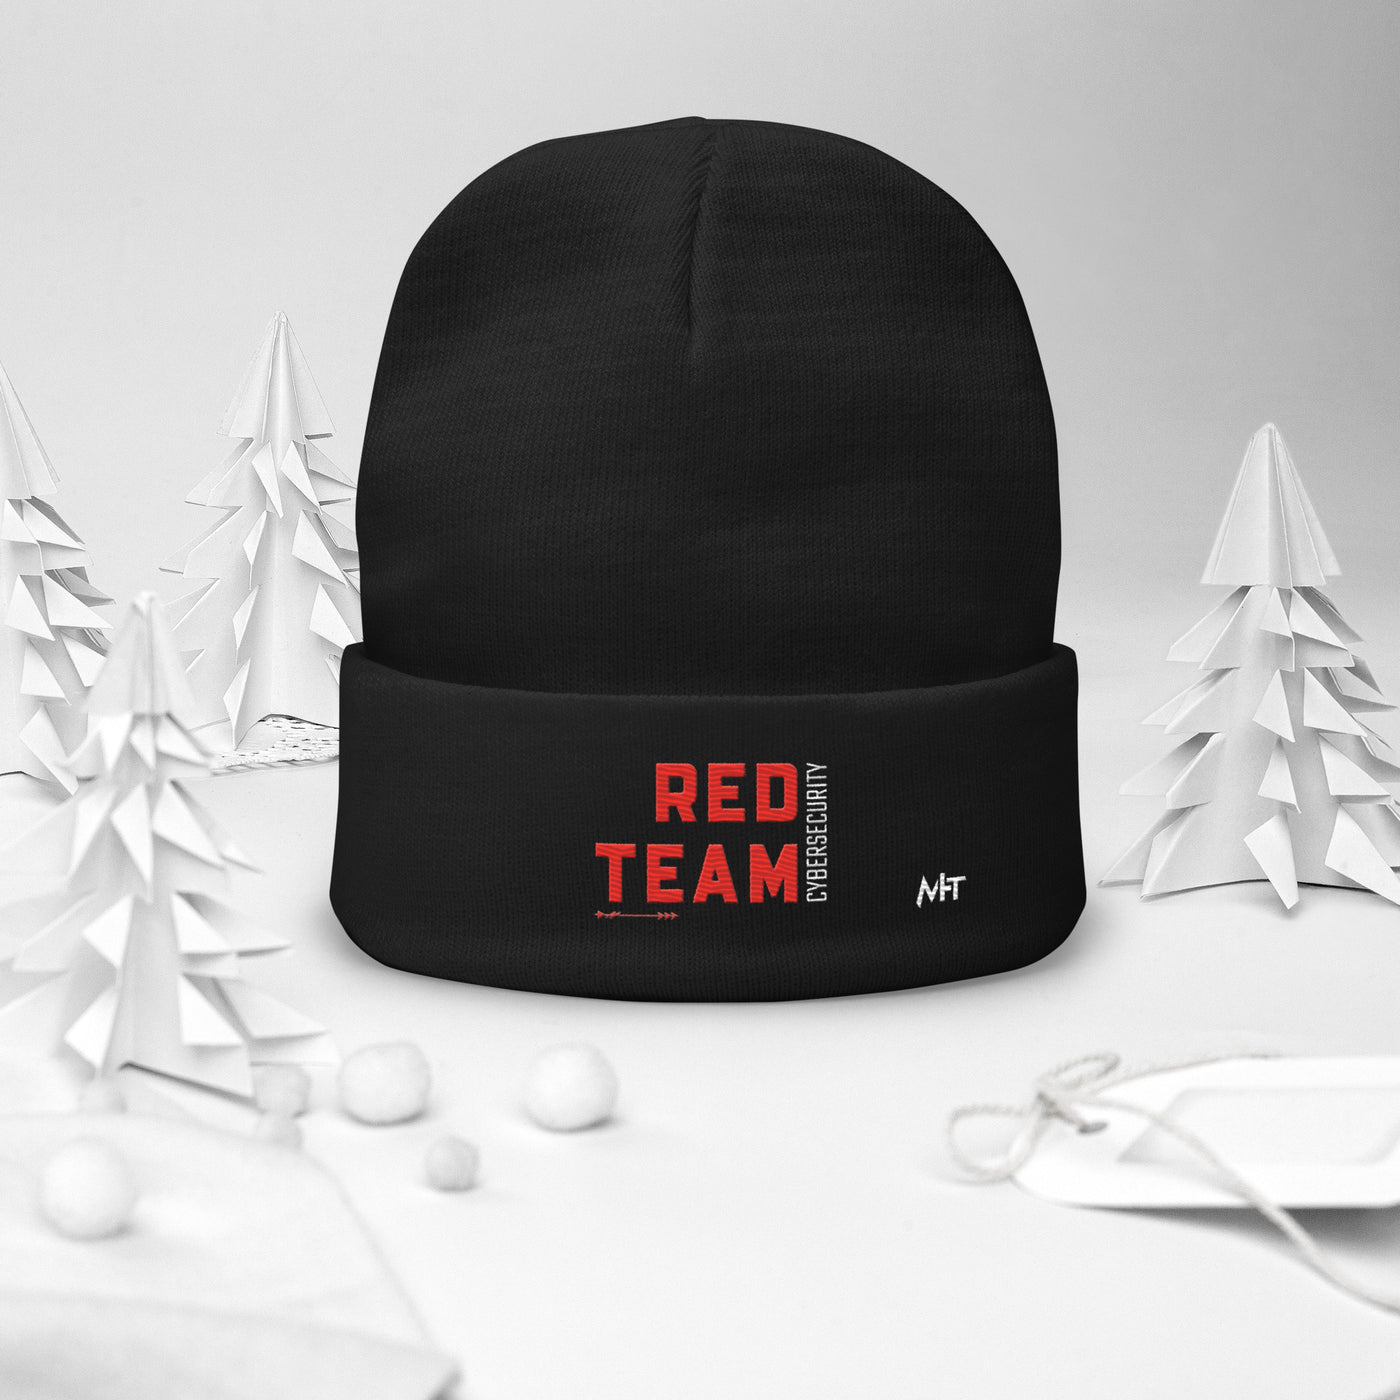 Cyber Security Red Team V8 - Embroidered Beanie